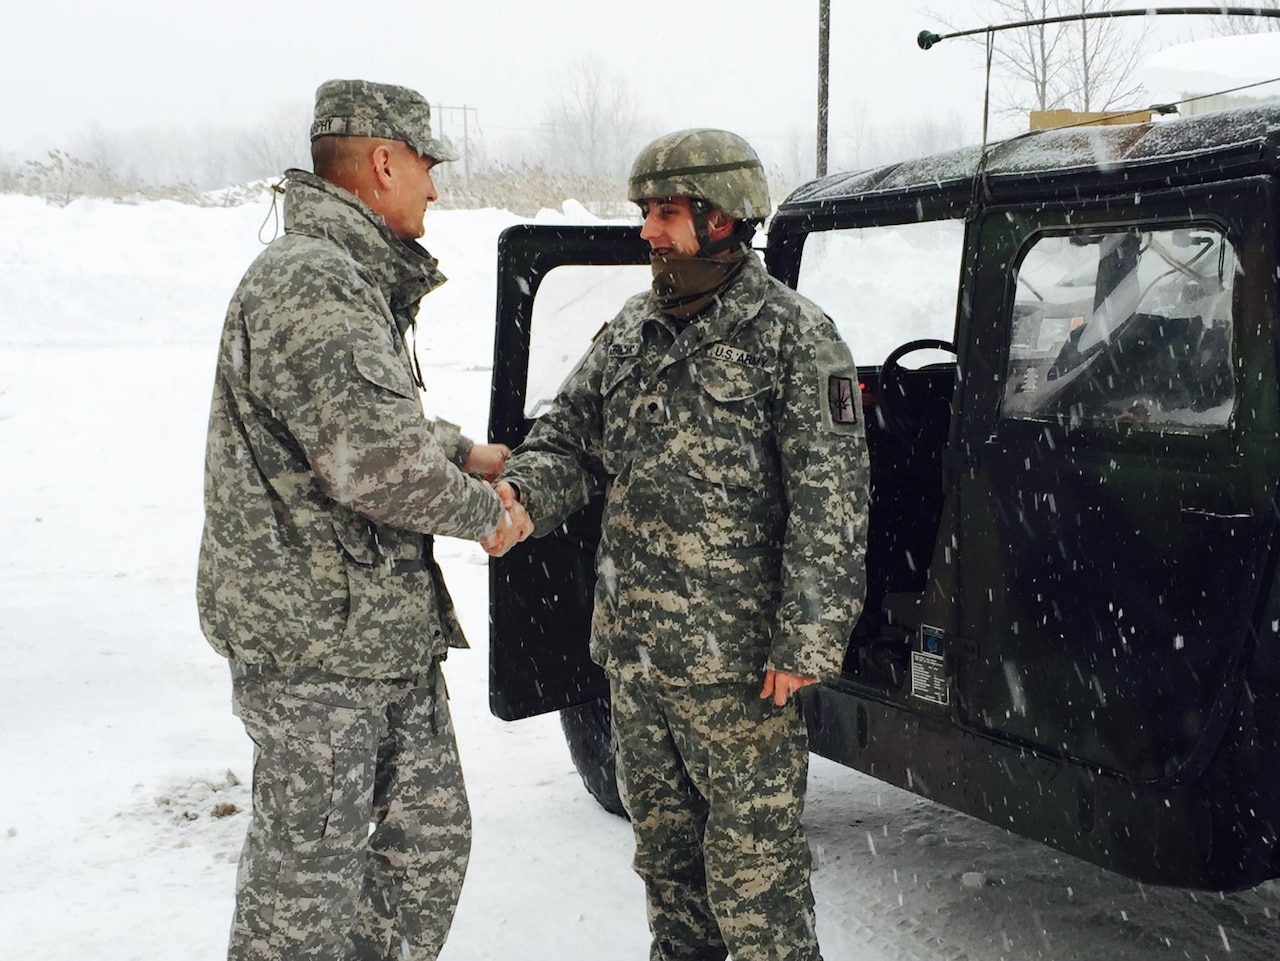 Army Maj. Gen. Patrick Murphy, left, New York’s adjutant general, congratulates Spc. Alan Pericak of the New York Army National Guard’s 152nd Engineer Company, Nov. 19, 2014, following his successful mission to drive New York Gov. Andrew Cuomo through areas paralyzed by historic snowfall. Pericak, from West Falls, N.Y., is part of the governor's mobilization of more than 340 National Guard soldiers and airmen from area units to assist local authorities with snow removal or traffic control across regions of western New York hit by a historic snowstorm. U.S. Army photo by Maj. Mark Frank